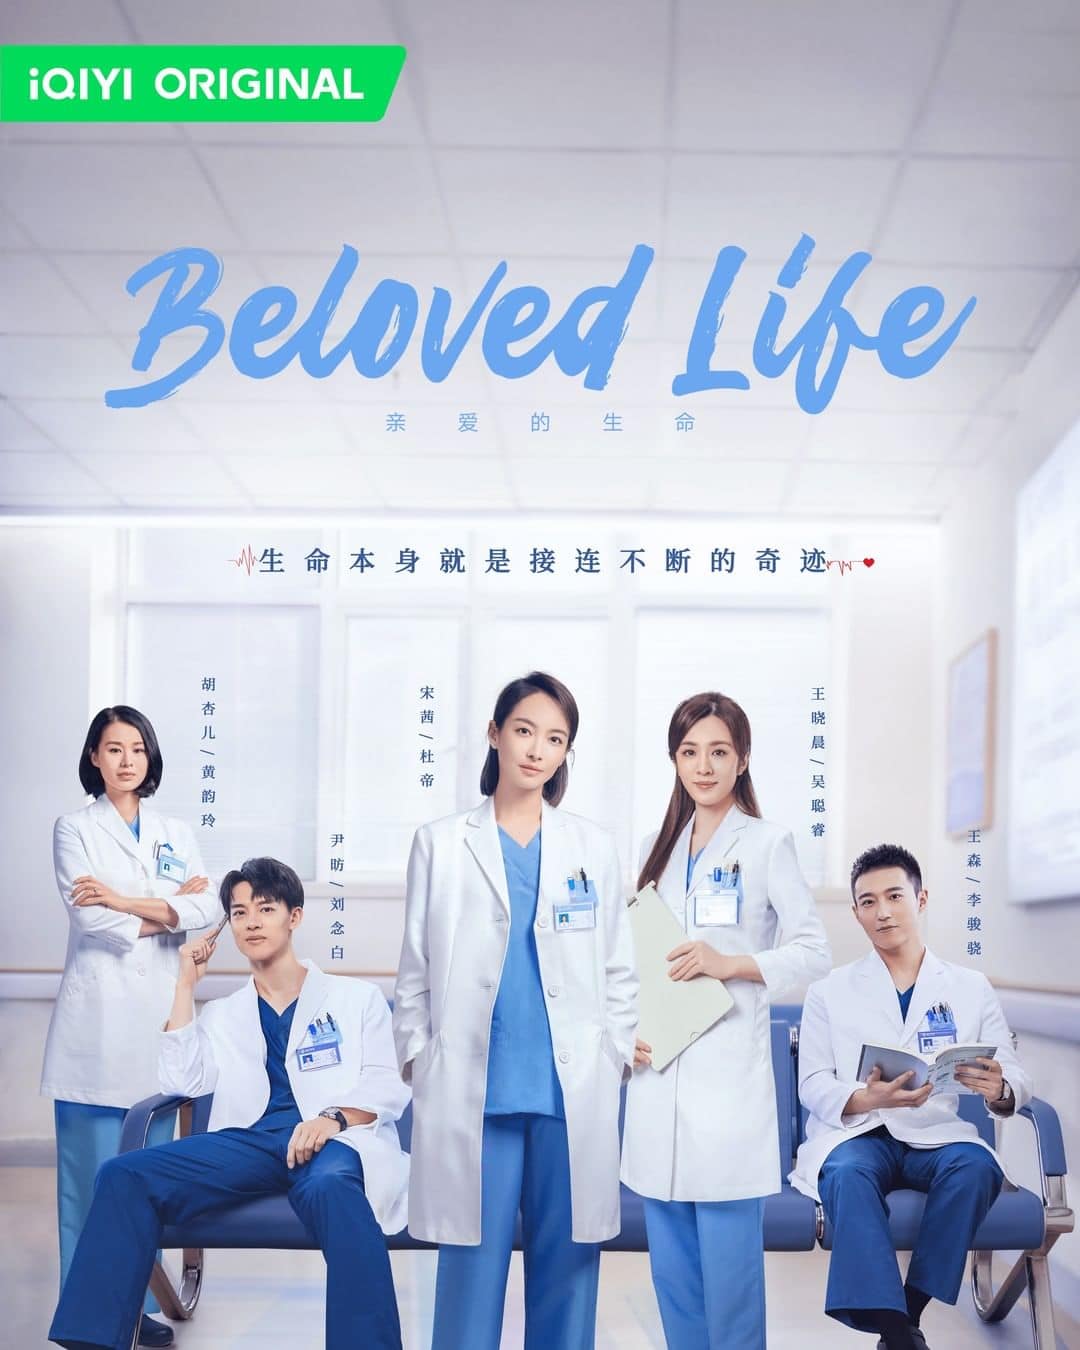 Beloved Life - Sinopsis, Pemain, OST, Episode, Review